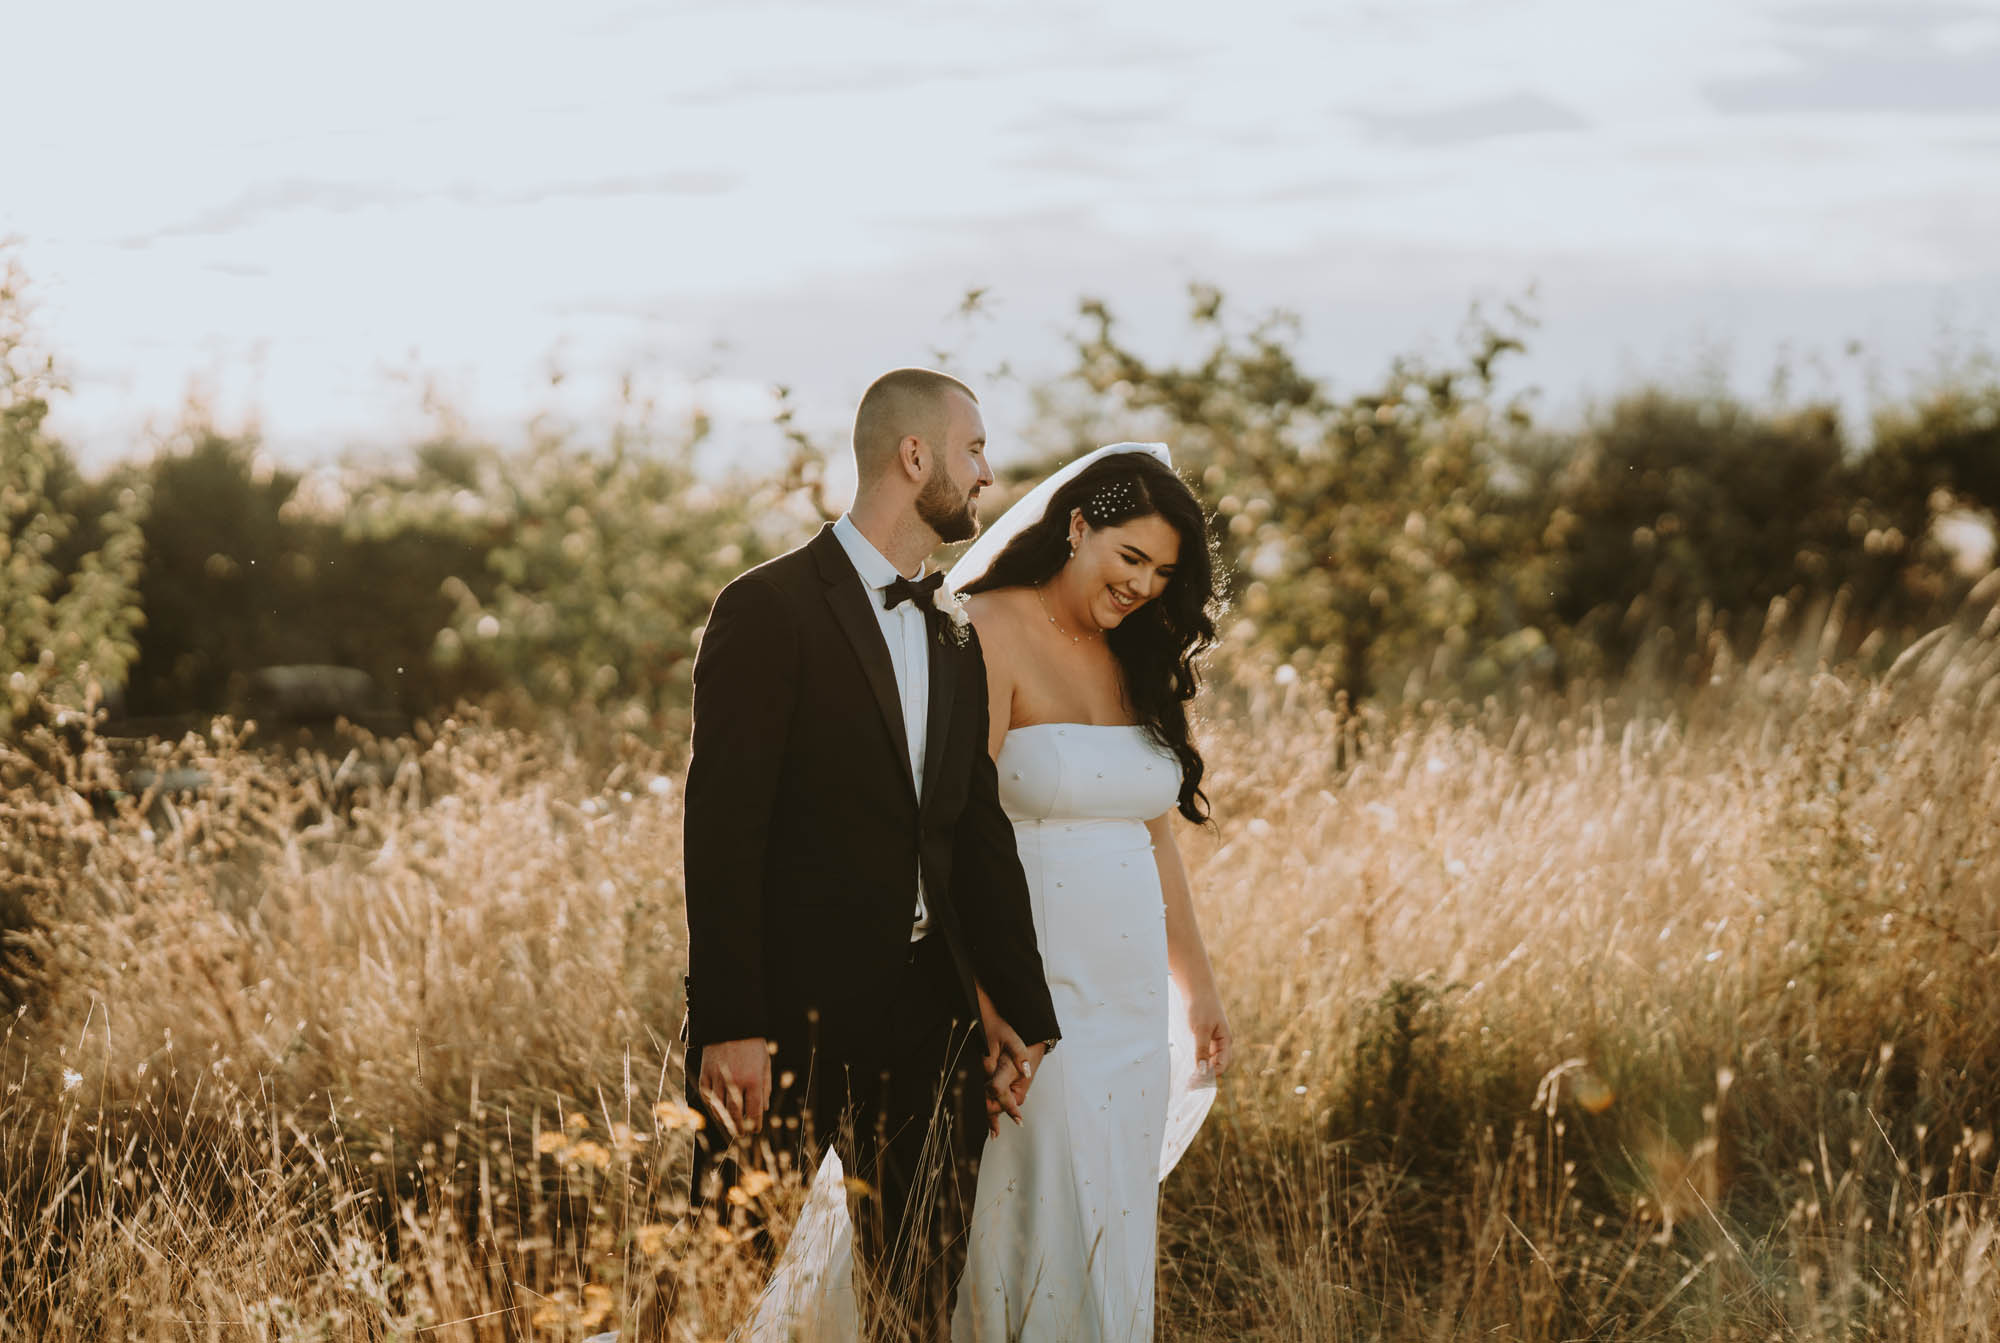 Newlyweds in a corn field. The groom wears black tie and the bride is in a strapless dress with veil. Image by Space Shark Weddings